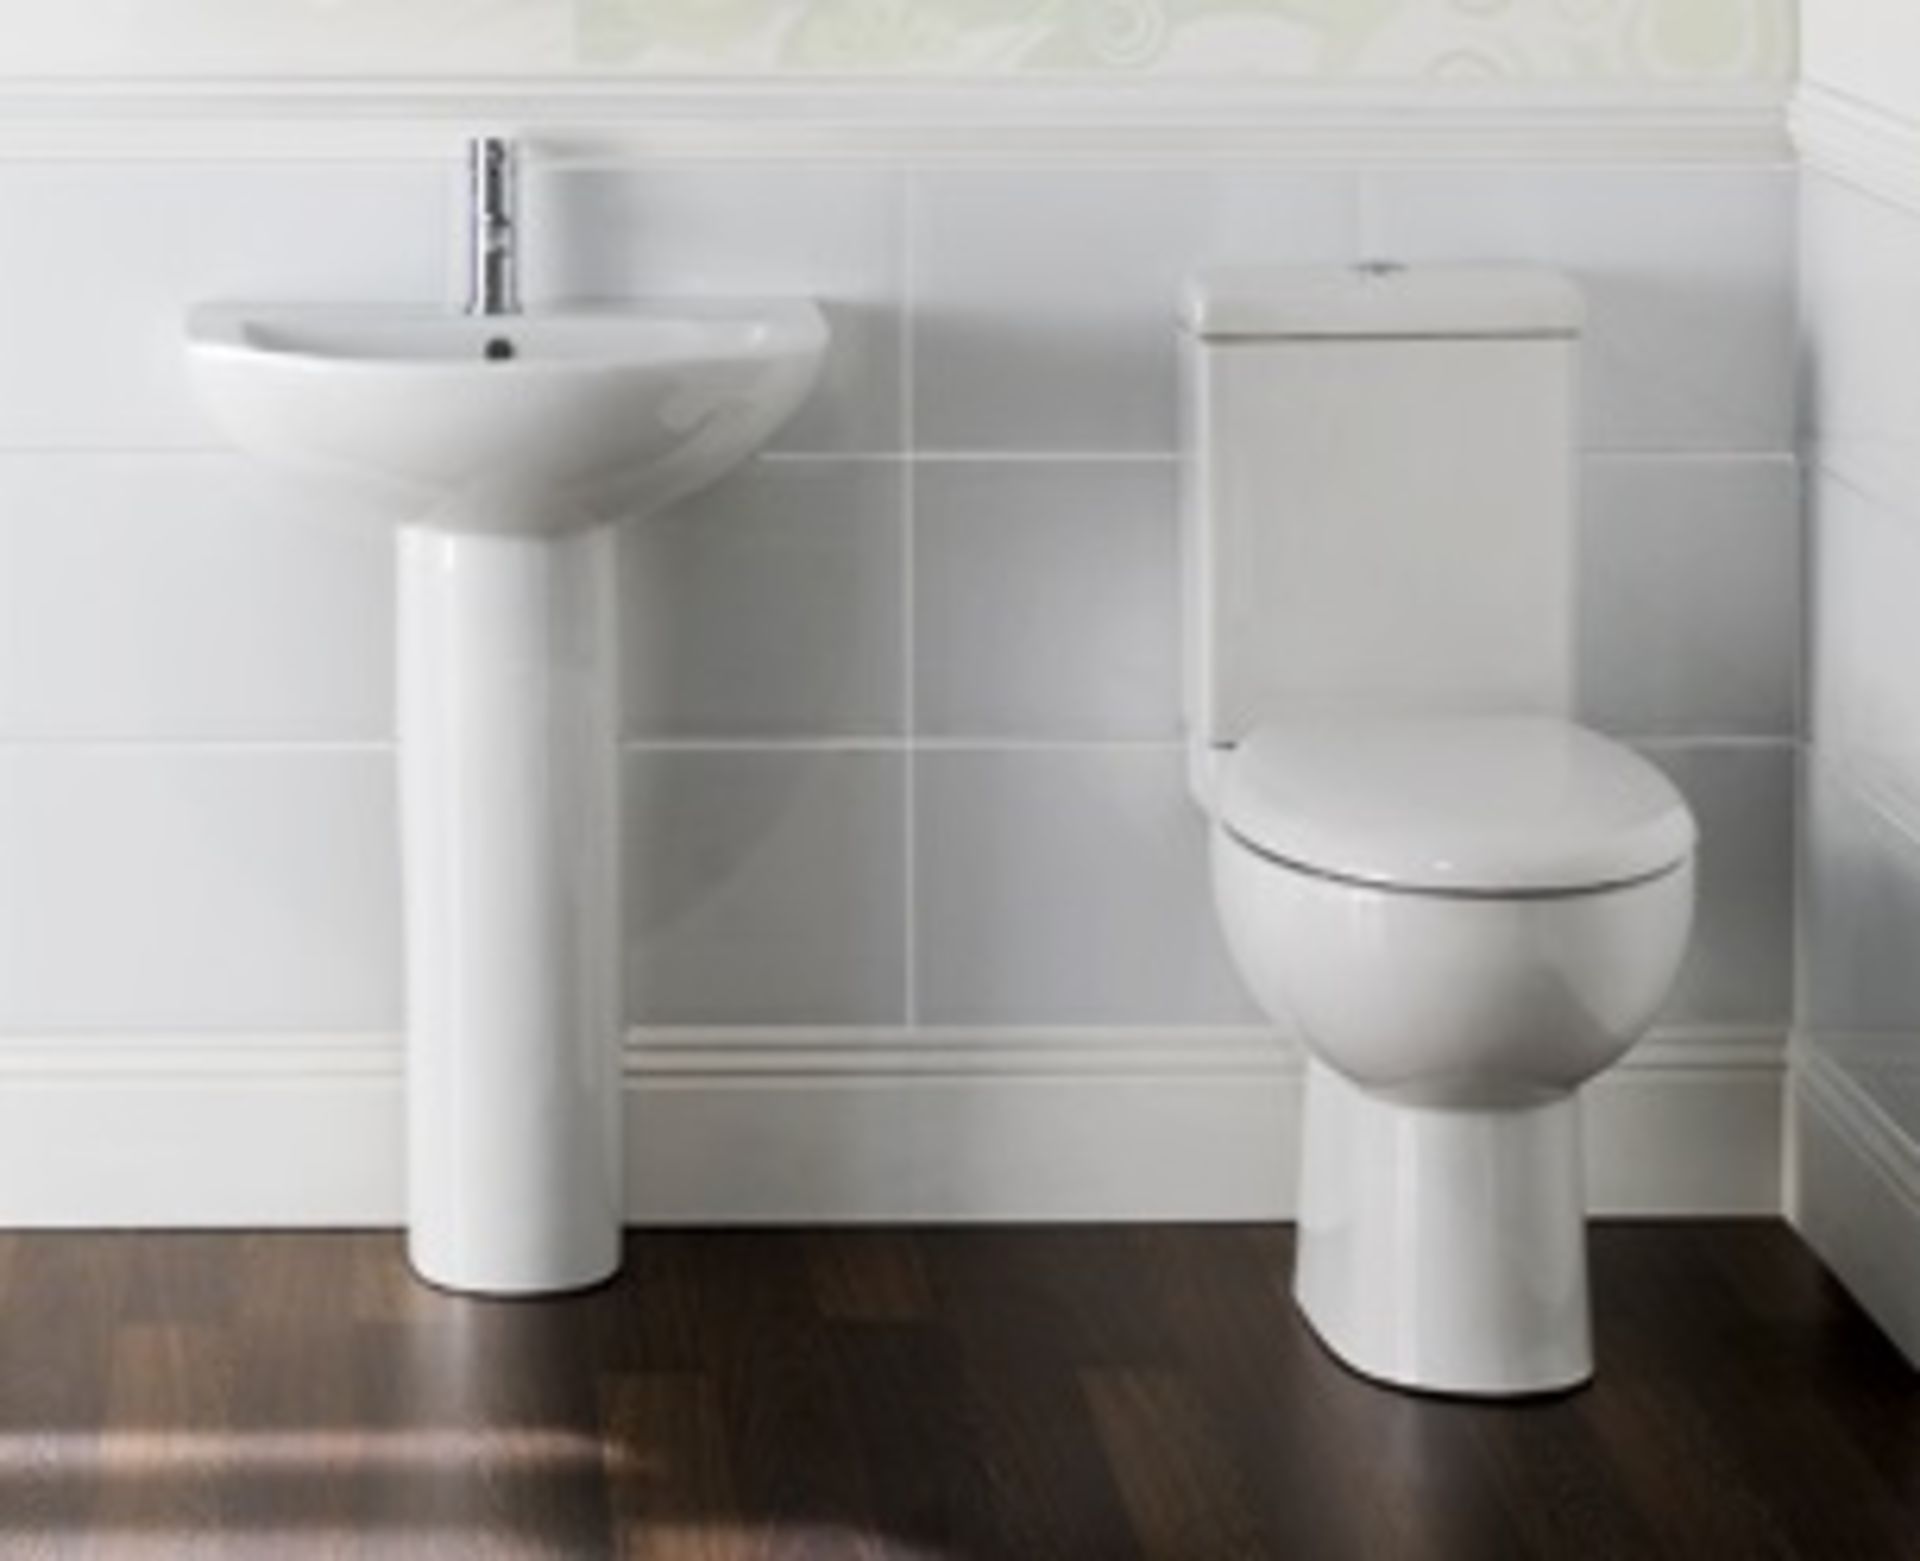 1 x Comfort Sink Basin & Toilet Set - Single Tap Sink Basin and Close Coupled Toilet Pan With